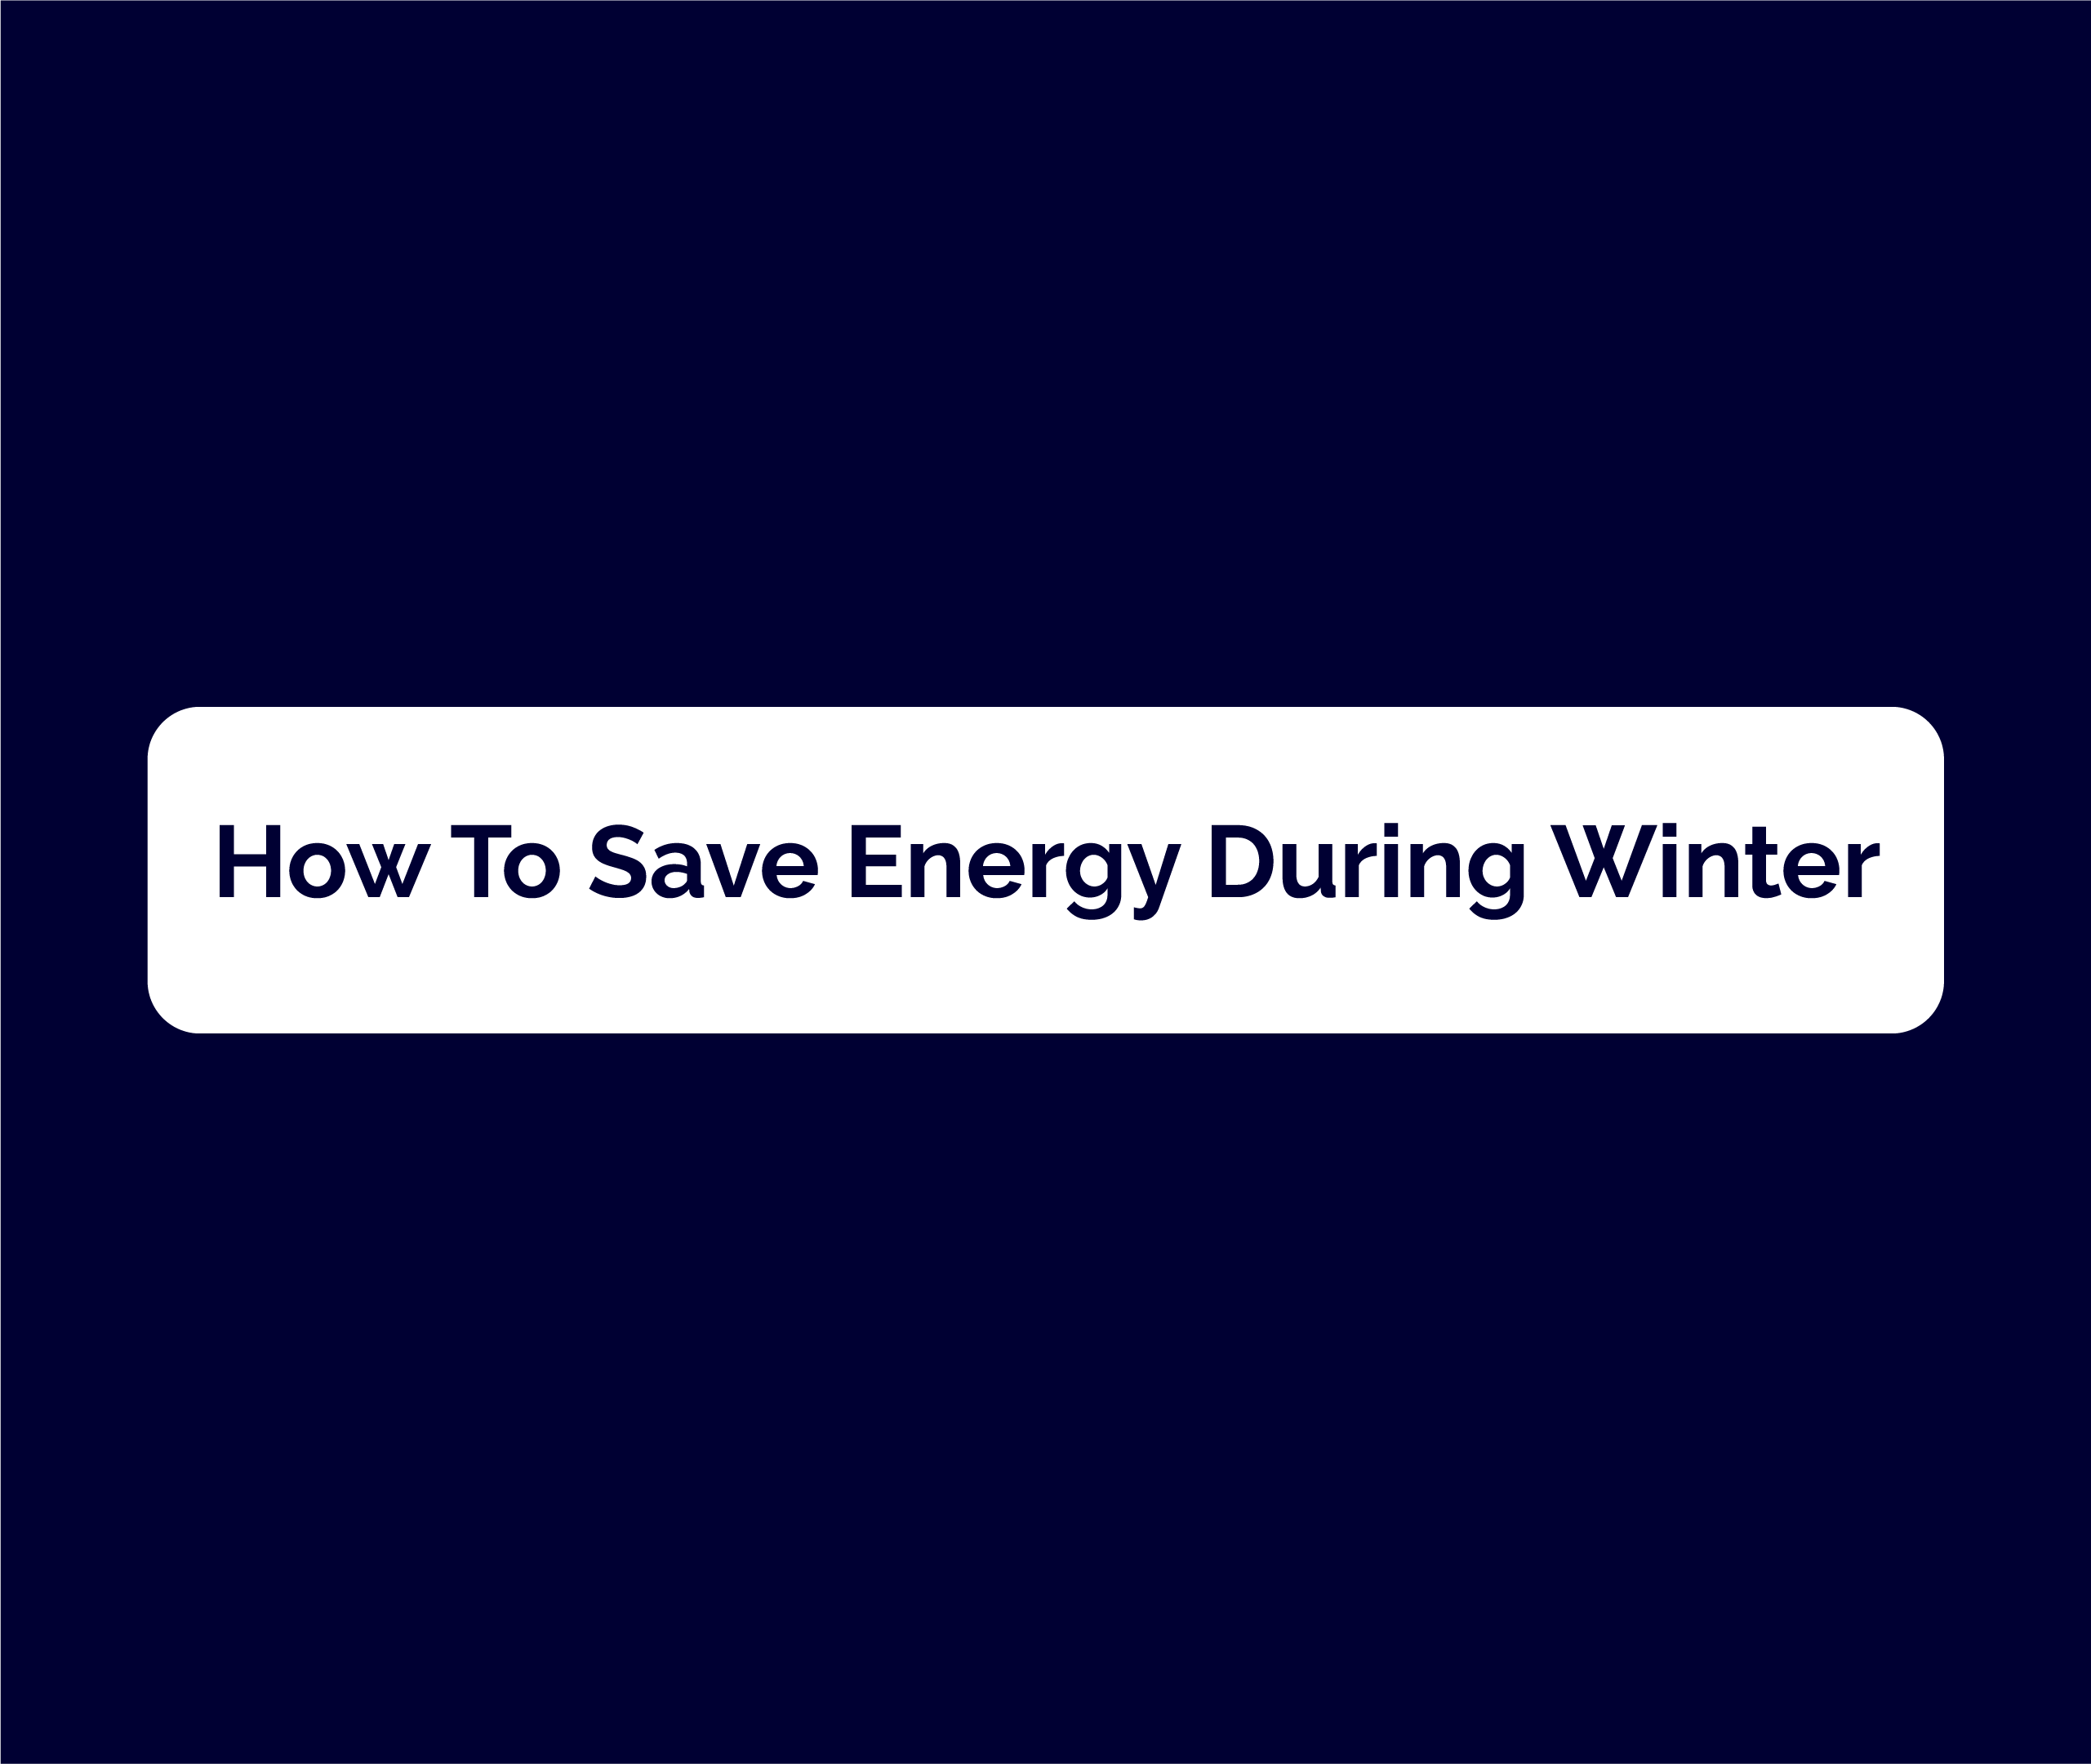 How to save energy during winter